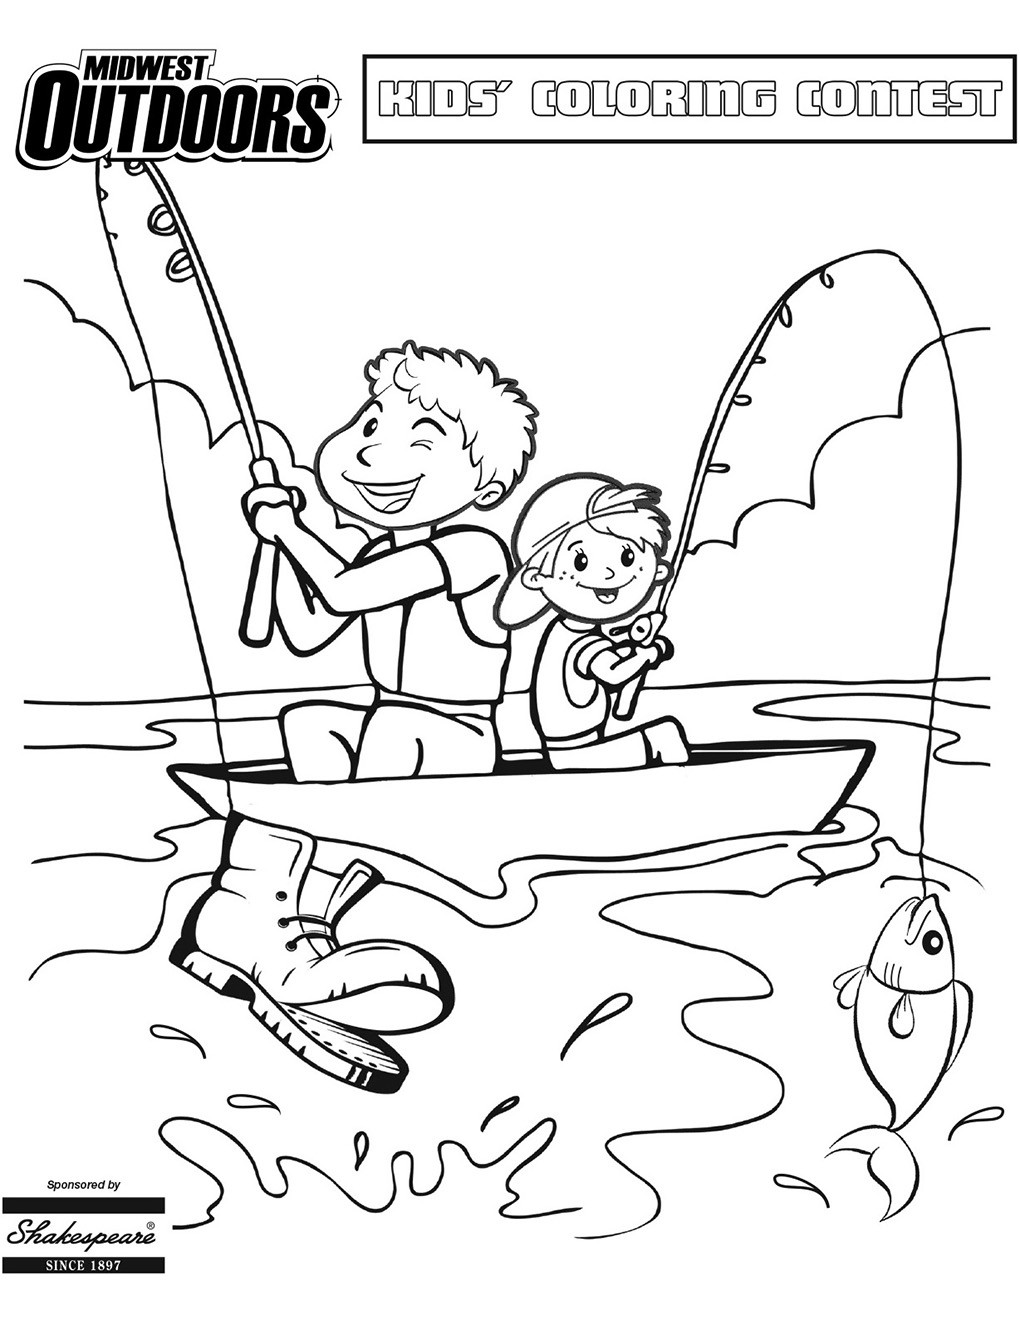 Kids Coloring Contest
 Coloring Contest MidWest Outdoors